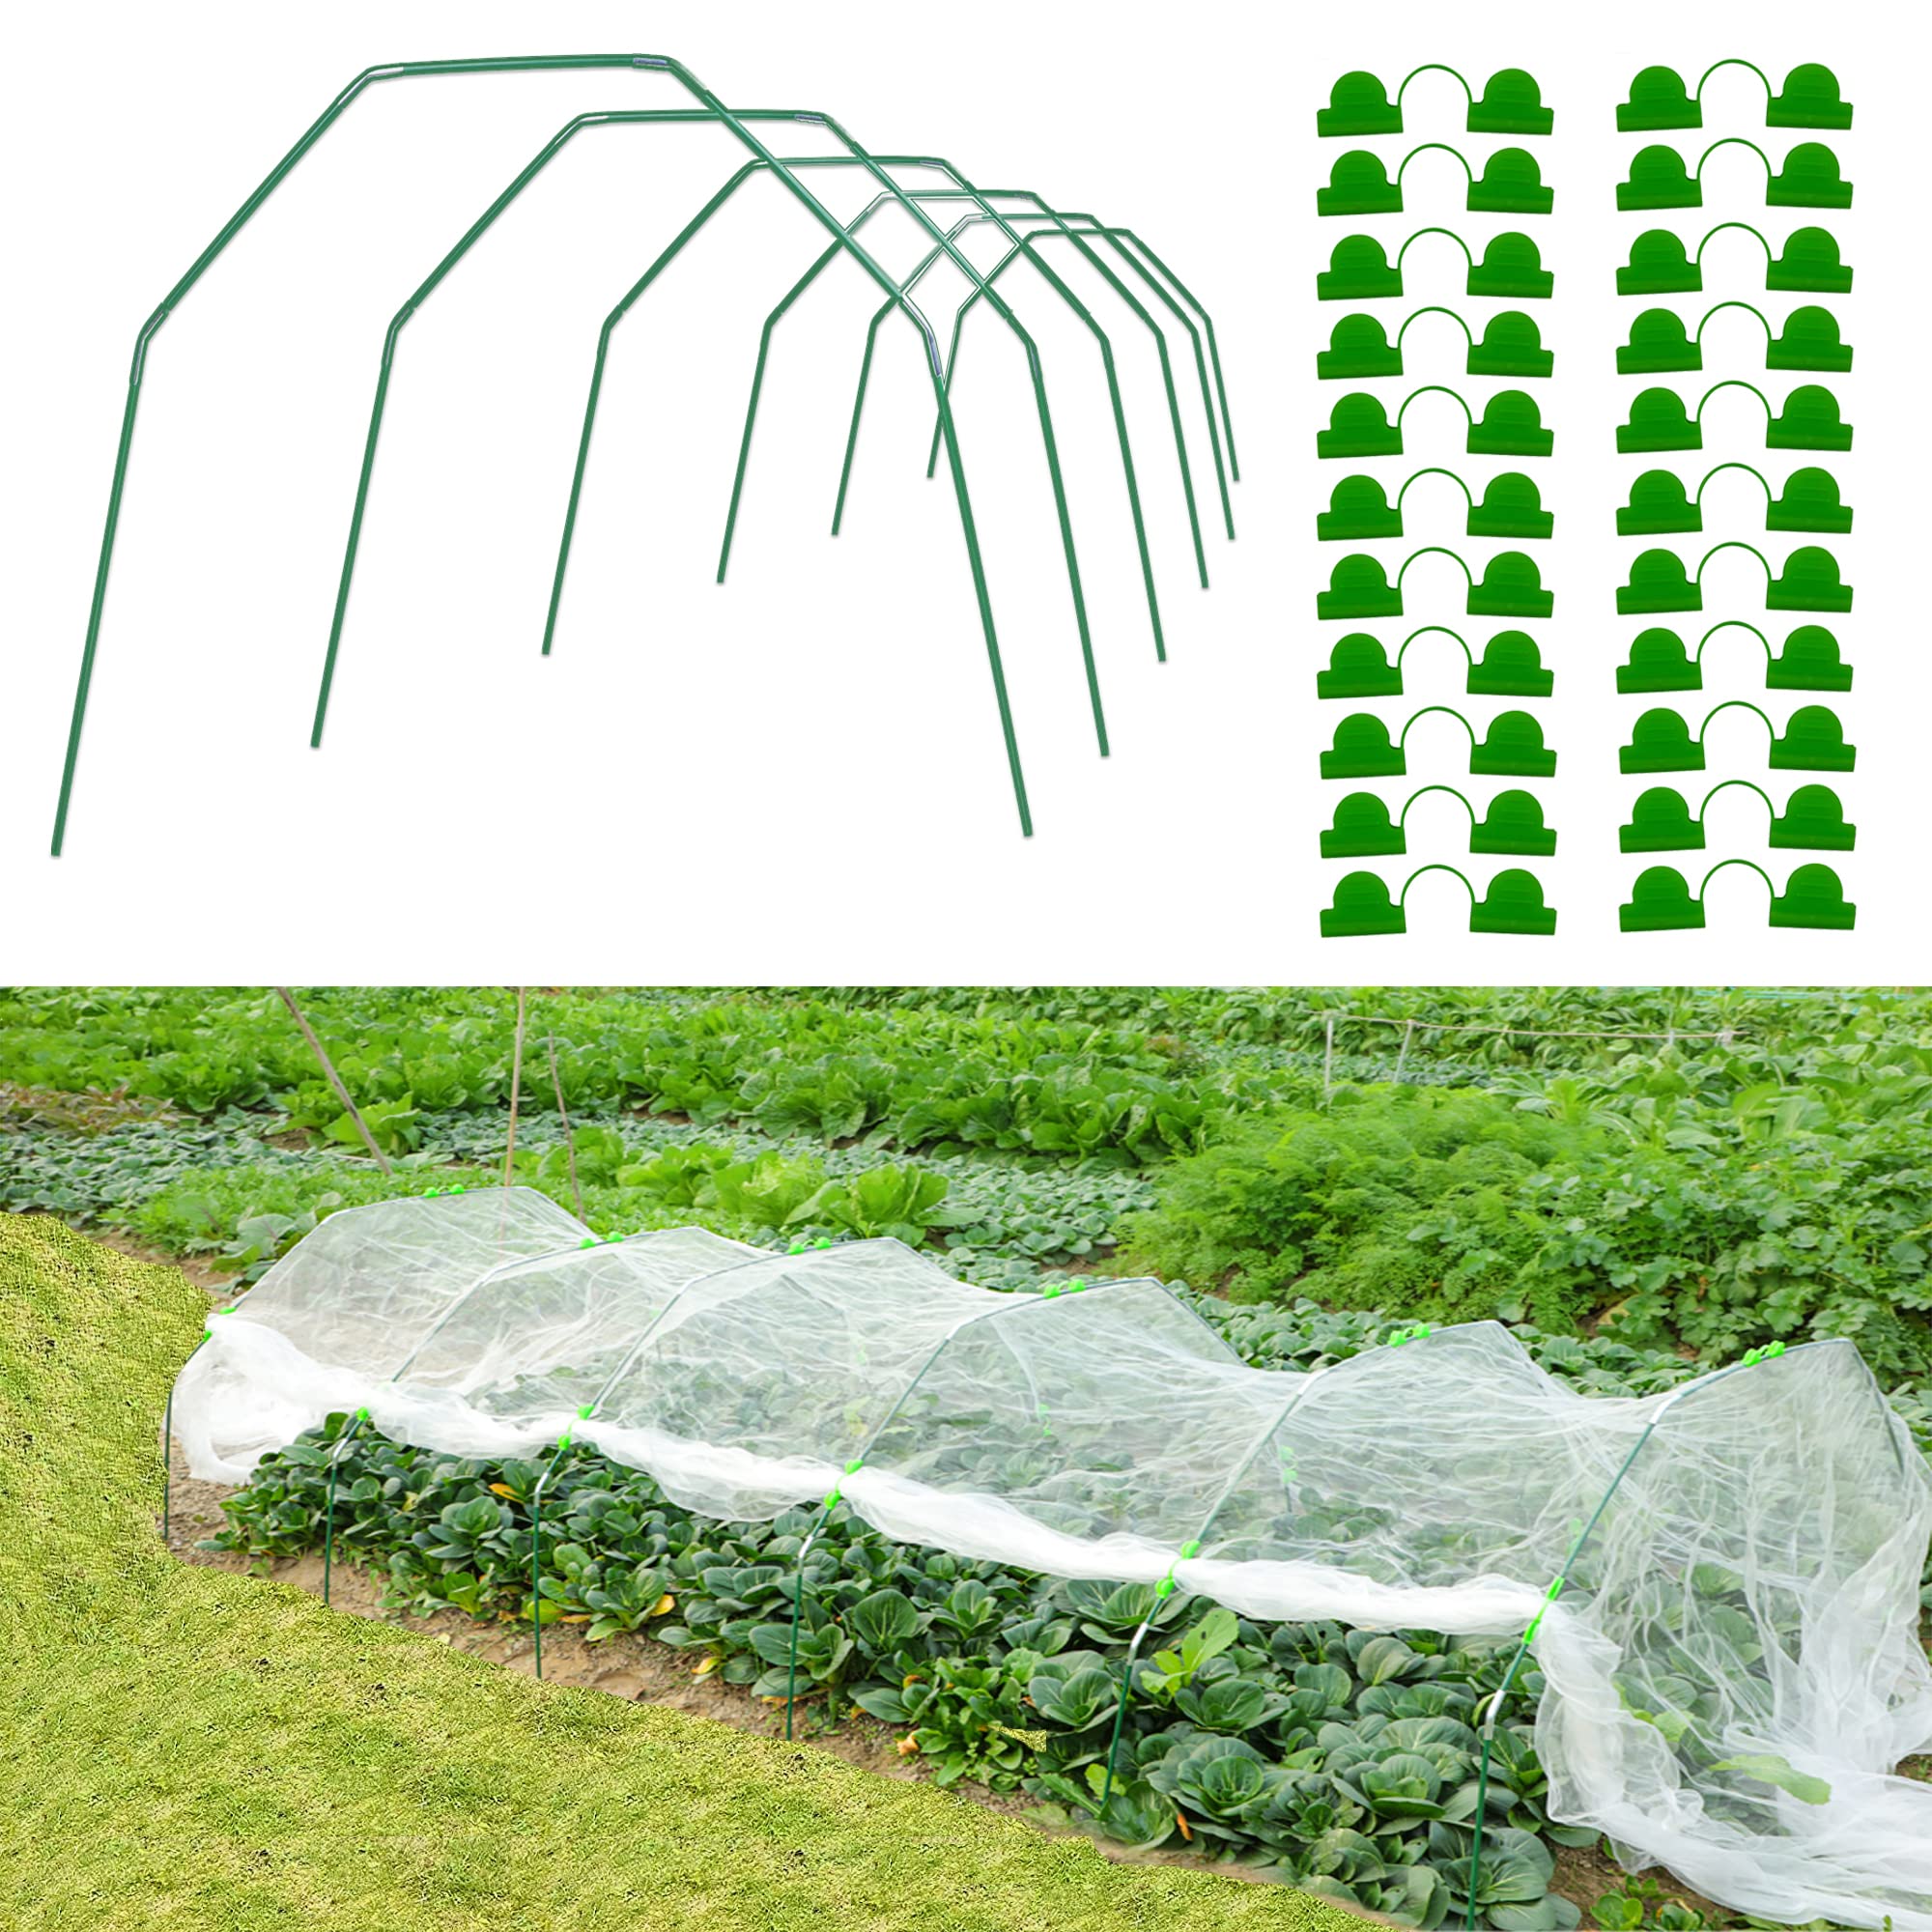 30pcs Greenhouse Frame Kit Fits 3/4/5ft Or Wider Garden Hoops Raised Bed Row Cover Netting DIY Fiberglass Support Stakes Up to 6 Sets of 7ft Long for Plant Vegetable Winter Frost Protection WingShop